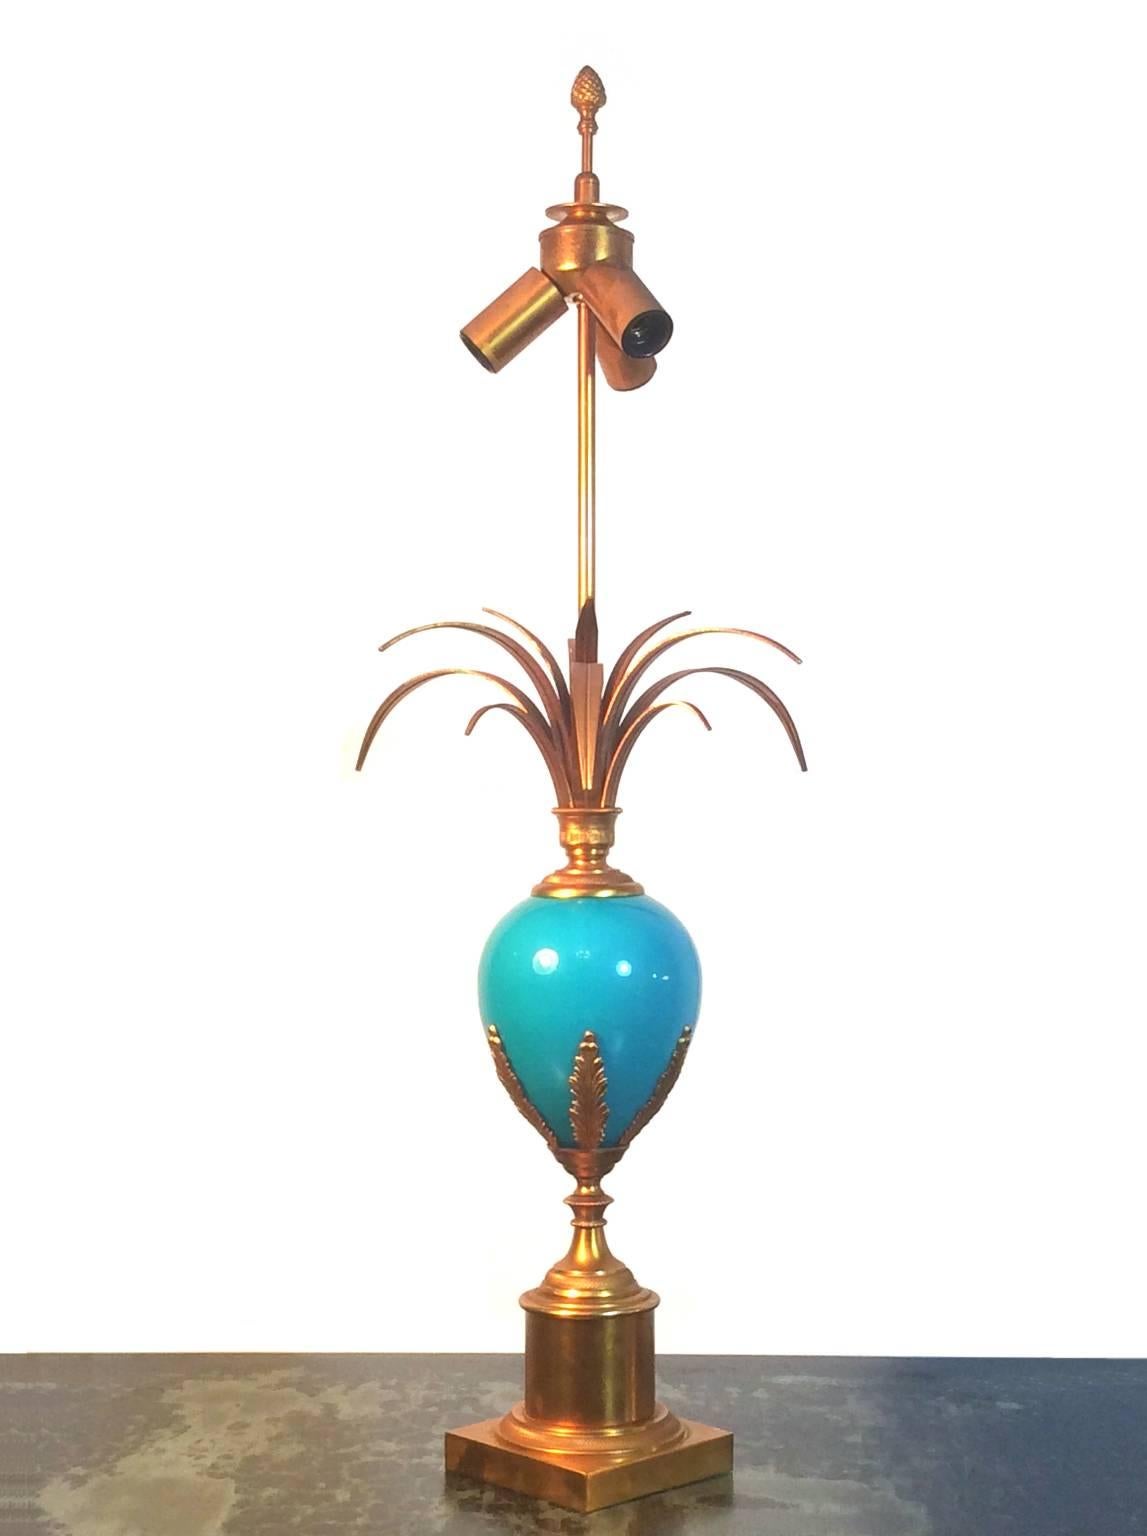 Table lamp with blue glass egg and gilt brass body. Very much in the style of Maison Charles, France, 1960s or 1970s.

Nice original condition with minor signs of wear in line with age and use, and an overall aged patina to the gilt brass. Due to